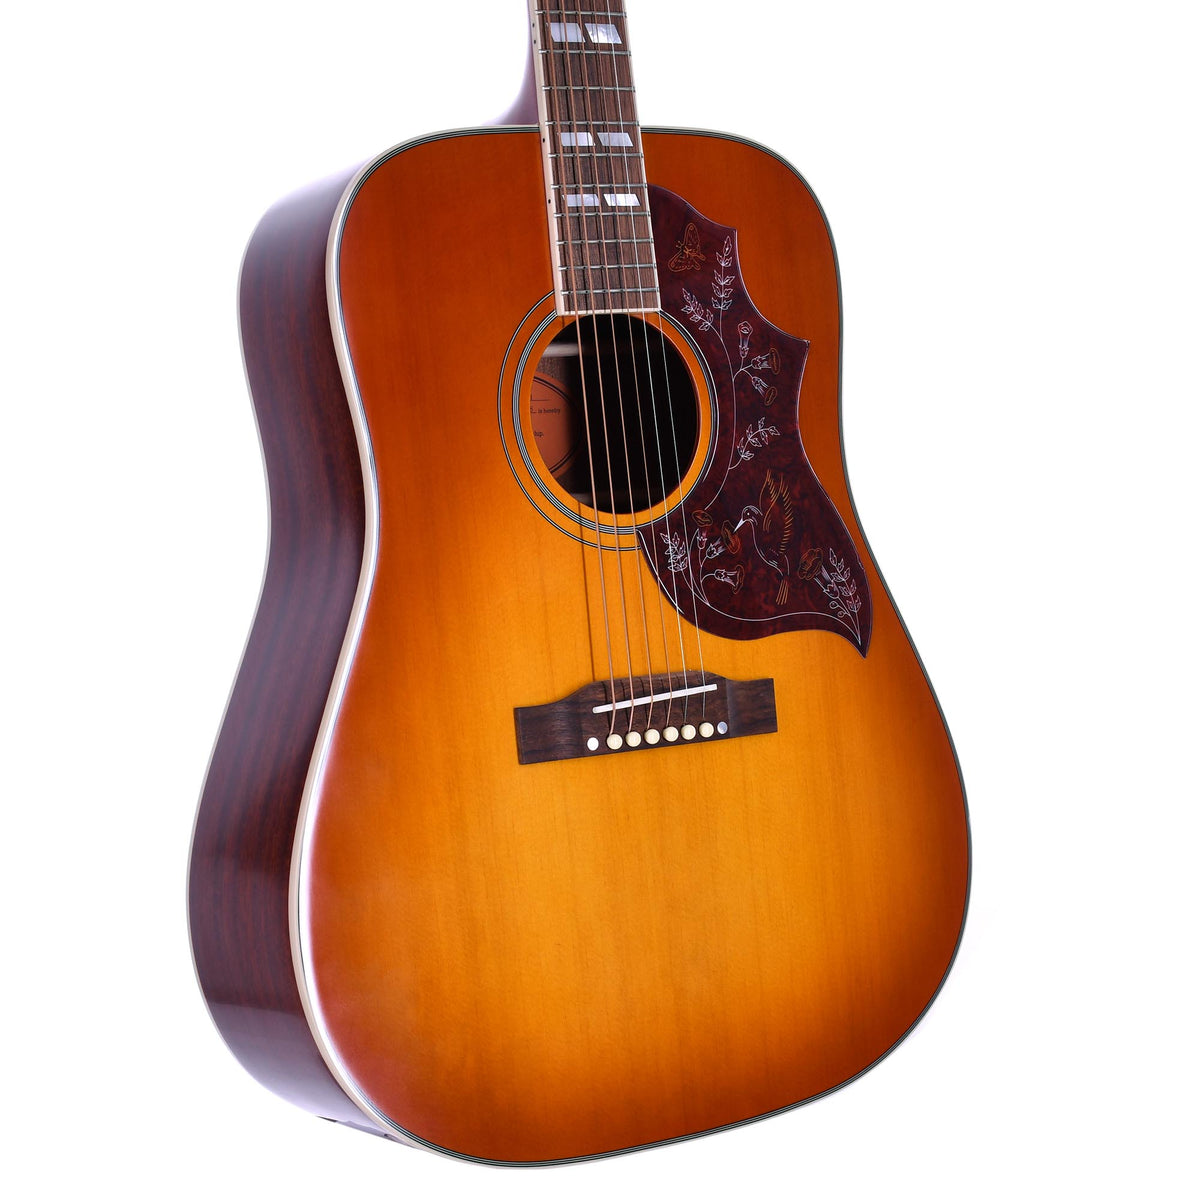 Are you considering purchasing an Epiphone Hummingbird Aged Cherry